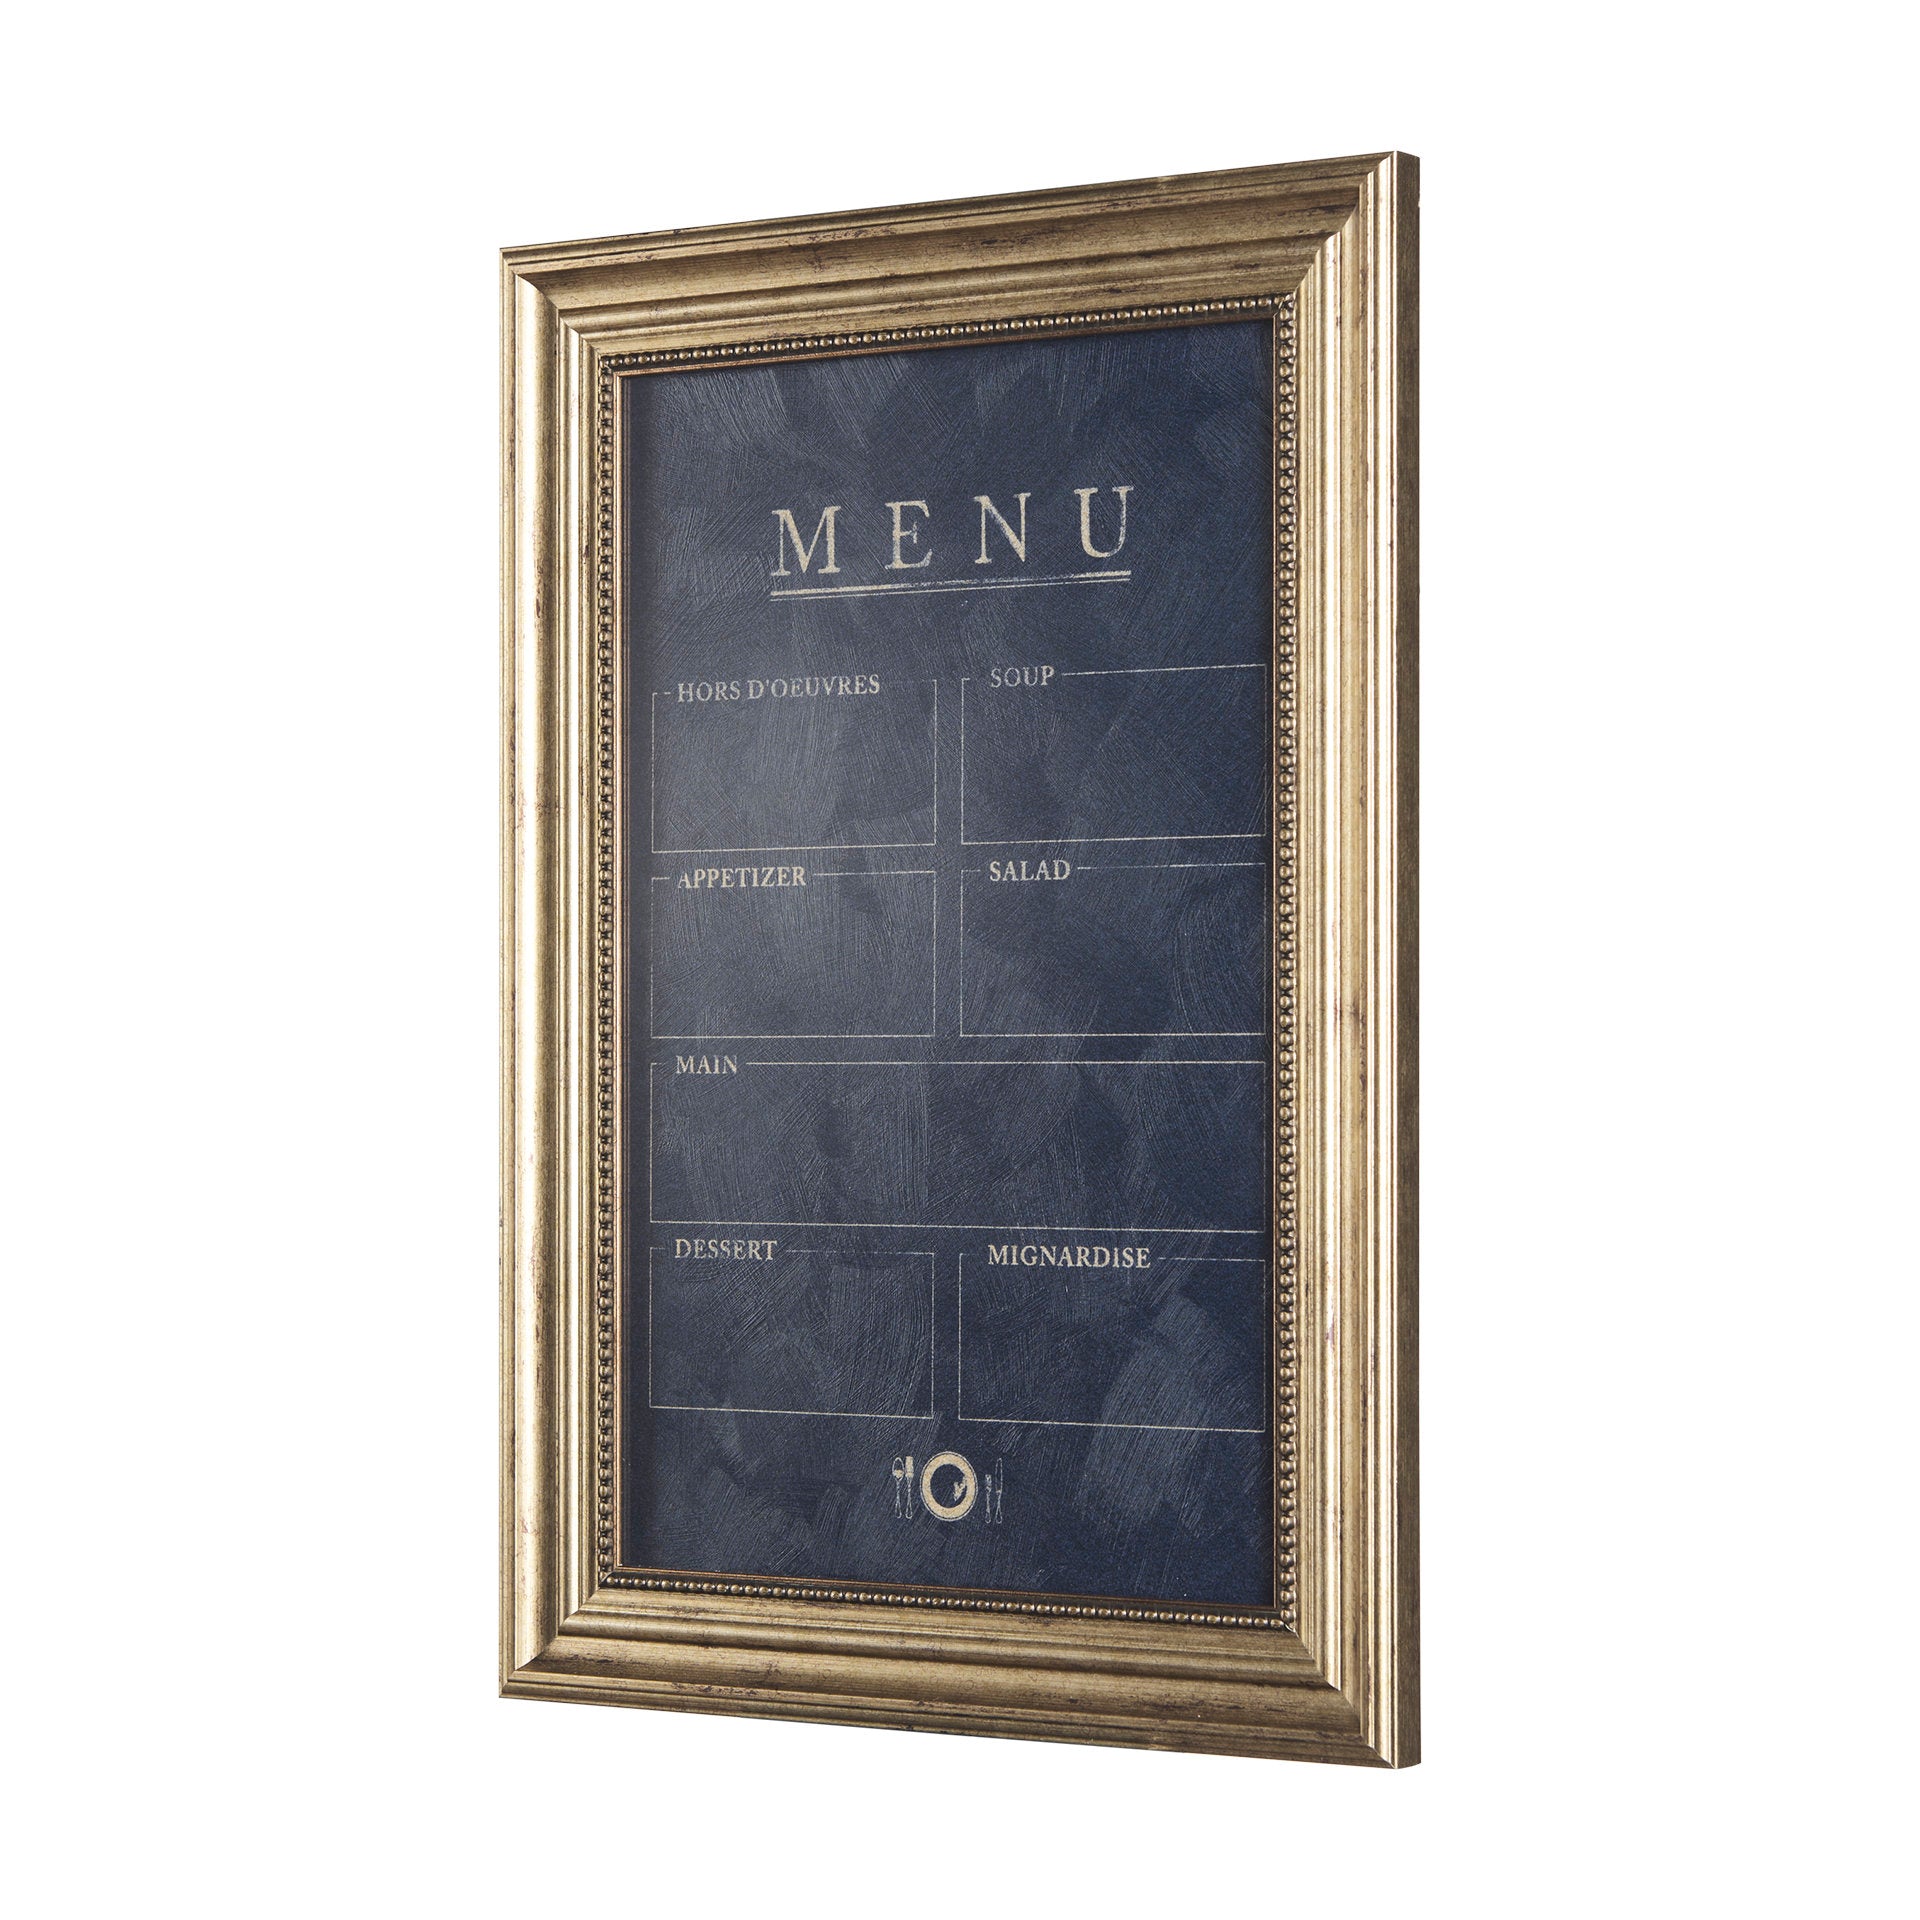 A framed Menu Art board by Mercana with decorative golden edges, featuring sections labeled &quot;Hors d&#39;oeuvres,&quot; &quot;Soup,&quot; &quot;Appetizer,&quot; &quot;Salad,&quot; &quot;Main,&quot; &quot;Dessert,&quot; and &quot;Mignardise&quot; on a textured dark blue background, displayed in a Scottsdale